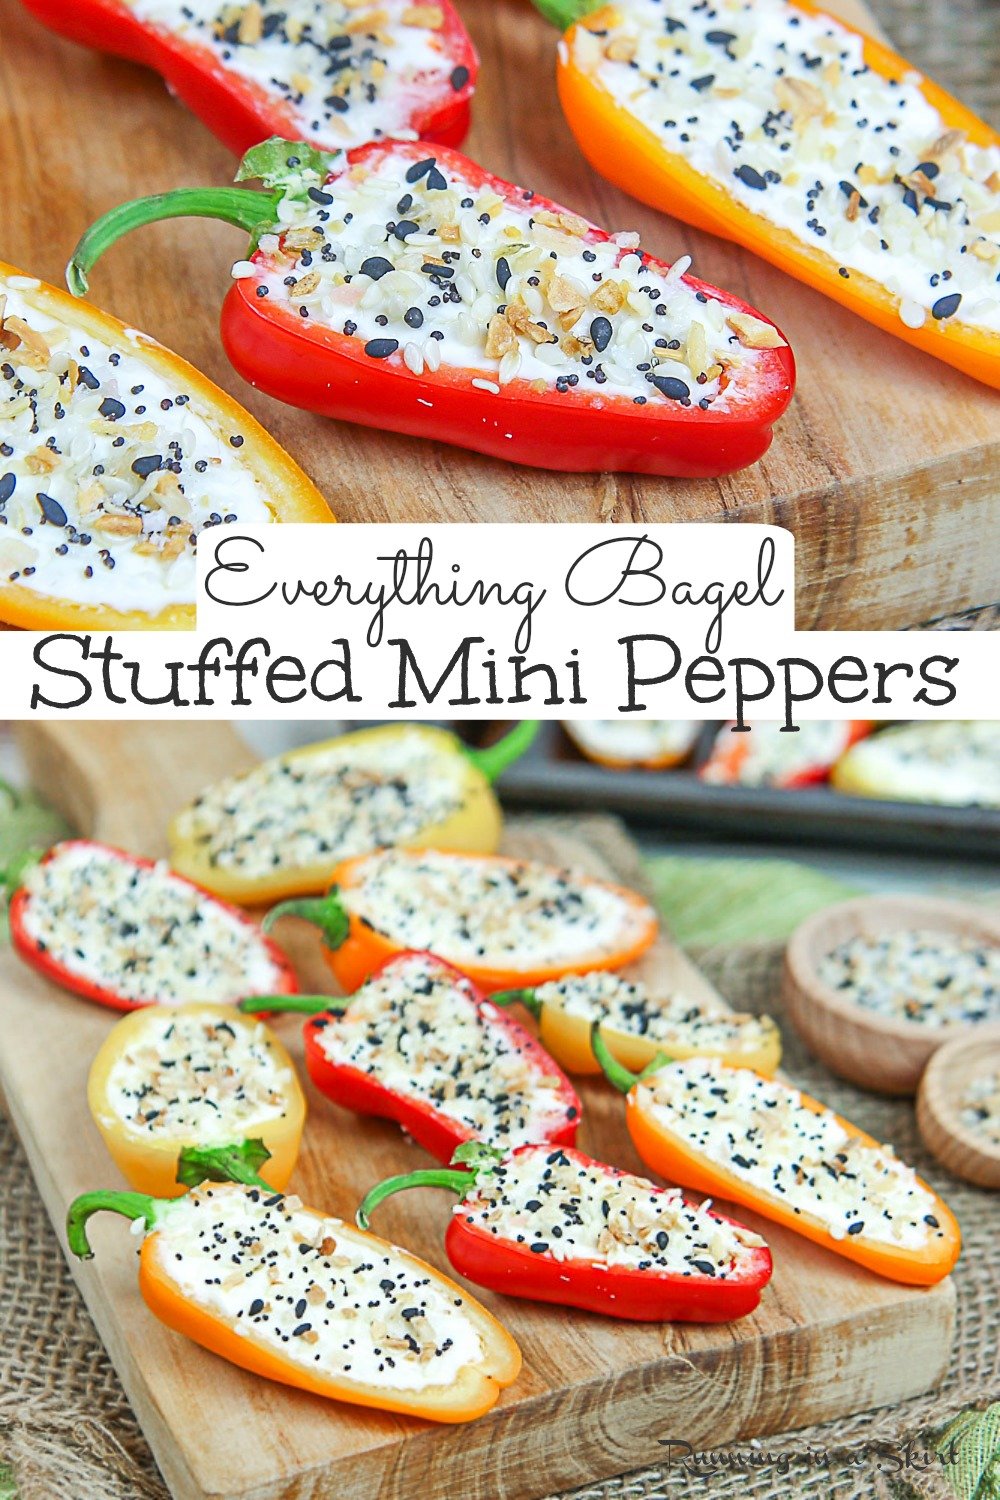 Everything Bagel Cream Cheese Stuffed Mini Peppers recipe - the best healthy appetizers finger foods! This recipe uses cream cheese cold and greek yogurt. An EASY 4 Ingredient Vegetarian recipe - keto, low carb and gluten free too. So simple and delicious. Clean Eating. / Running in a Skirt #superbowlrecipe #healthyliving #keto #lowcarb #vegetarian #glutenfree #cleaneating via @juliewunder